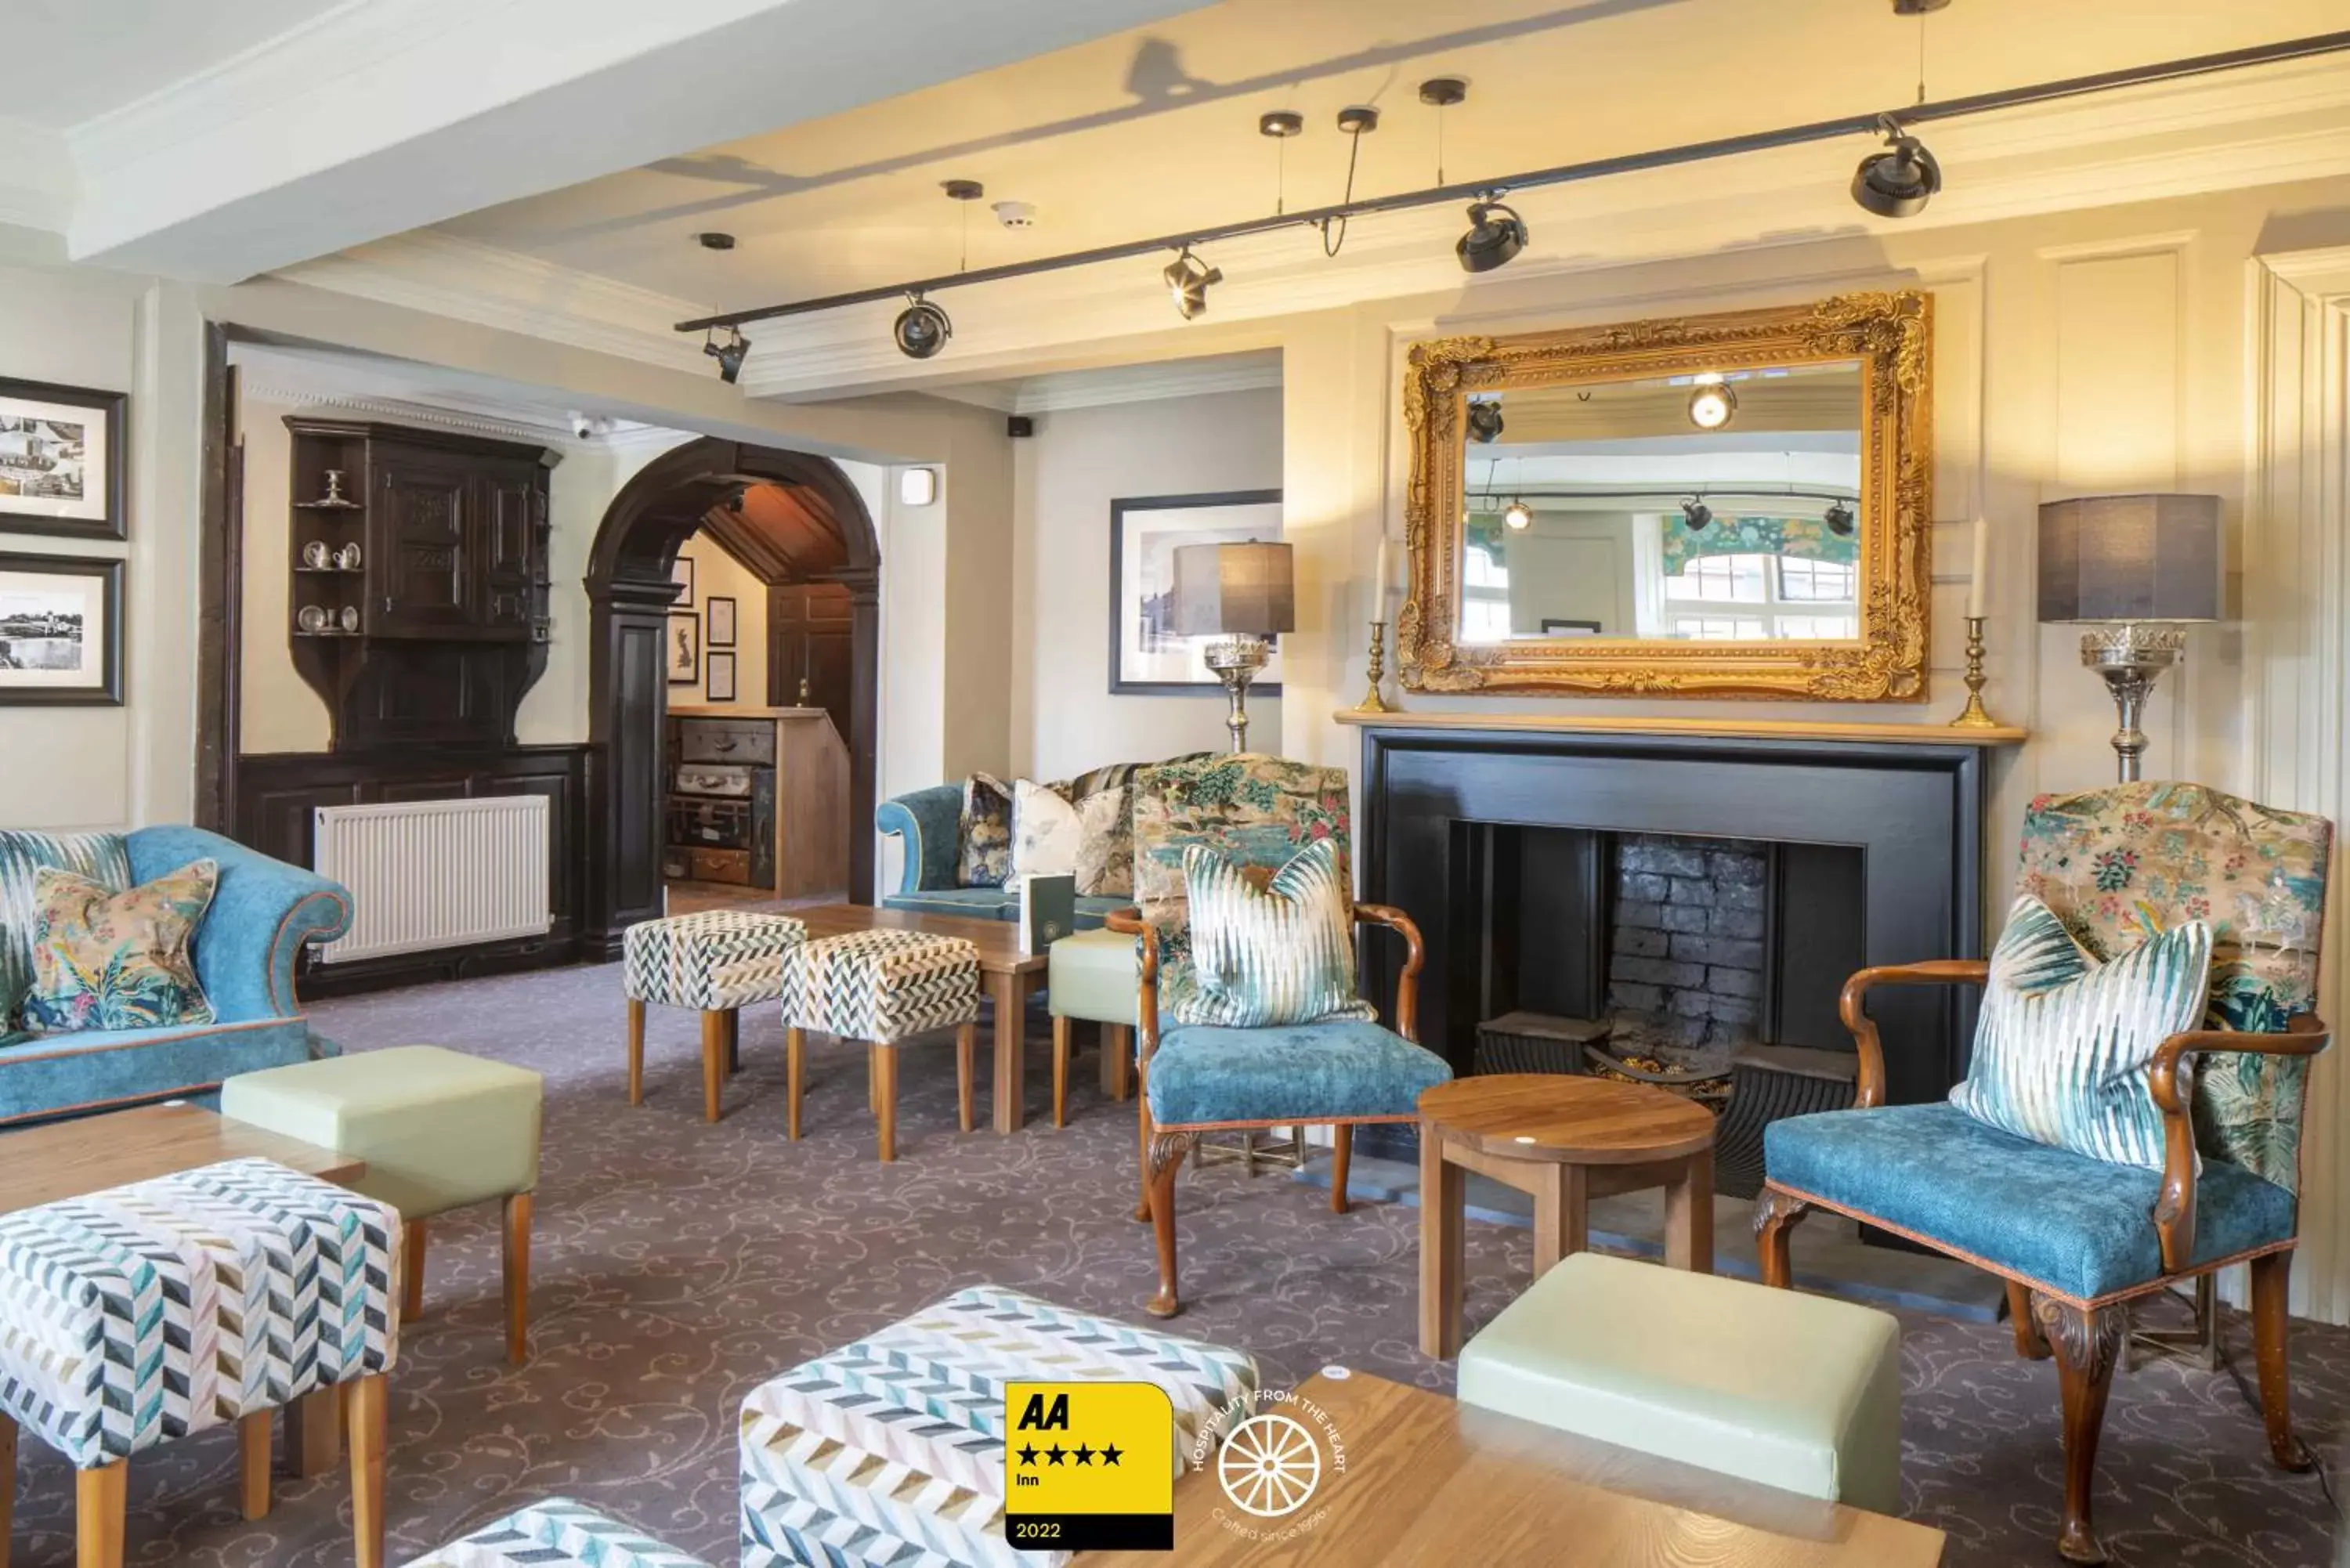 Lounge or bar, Seating Area in The Tudor House Hotel, Tewkesbury, Gloucestershire